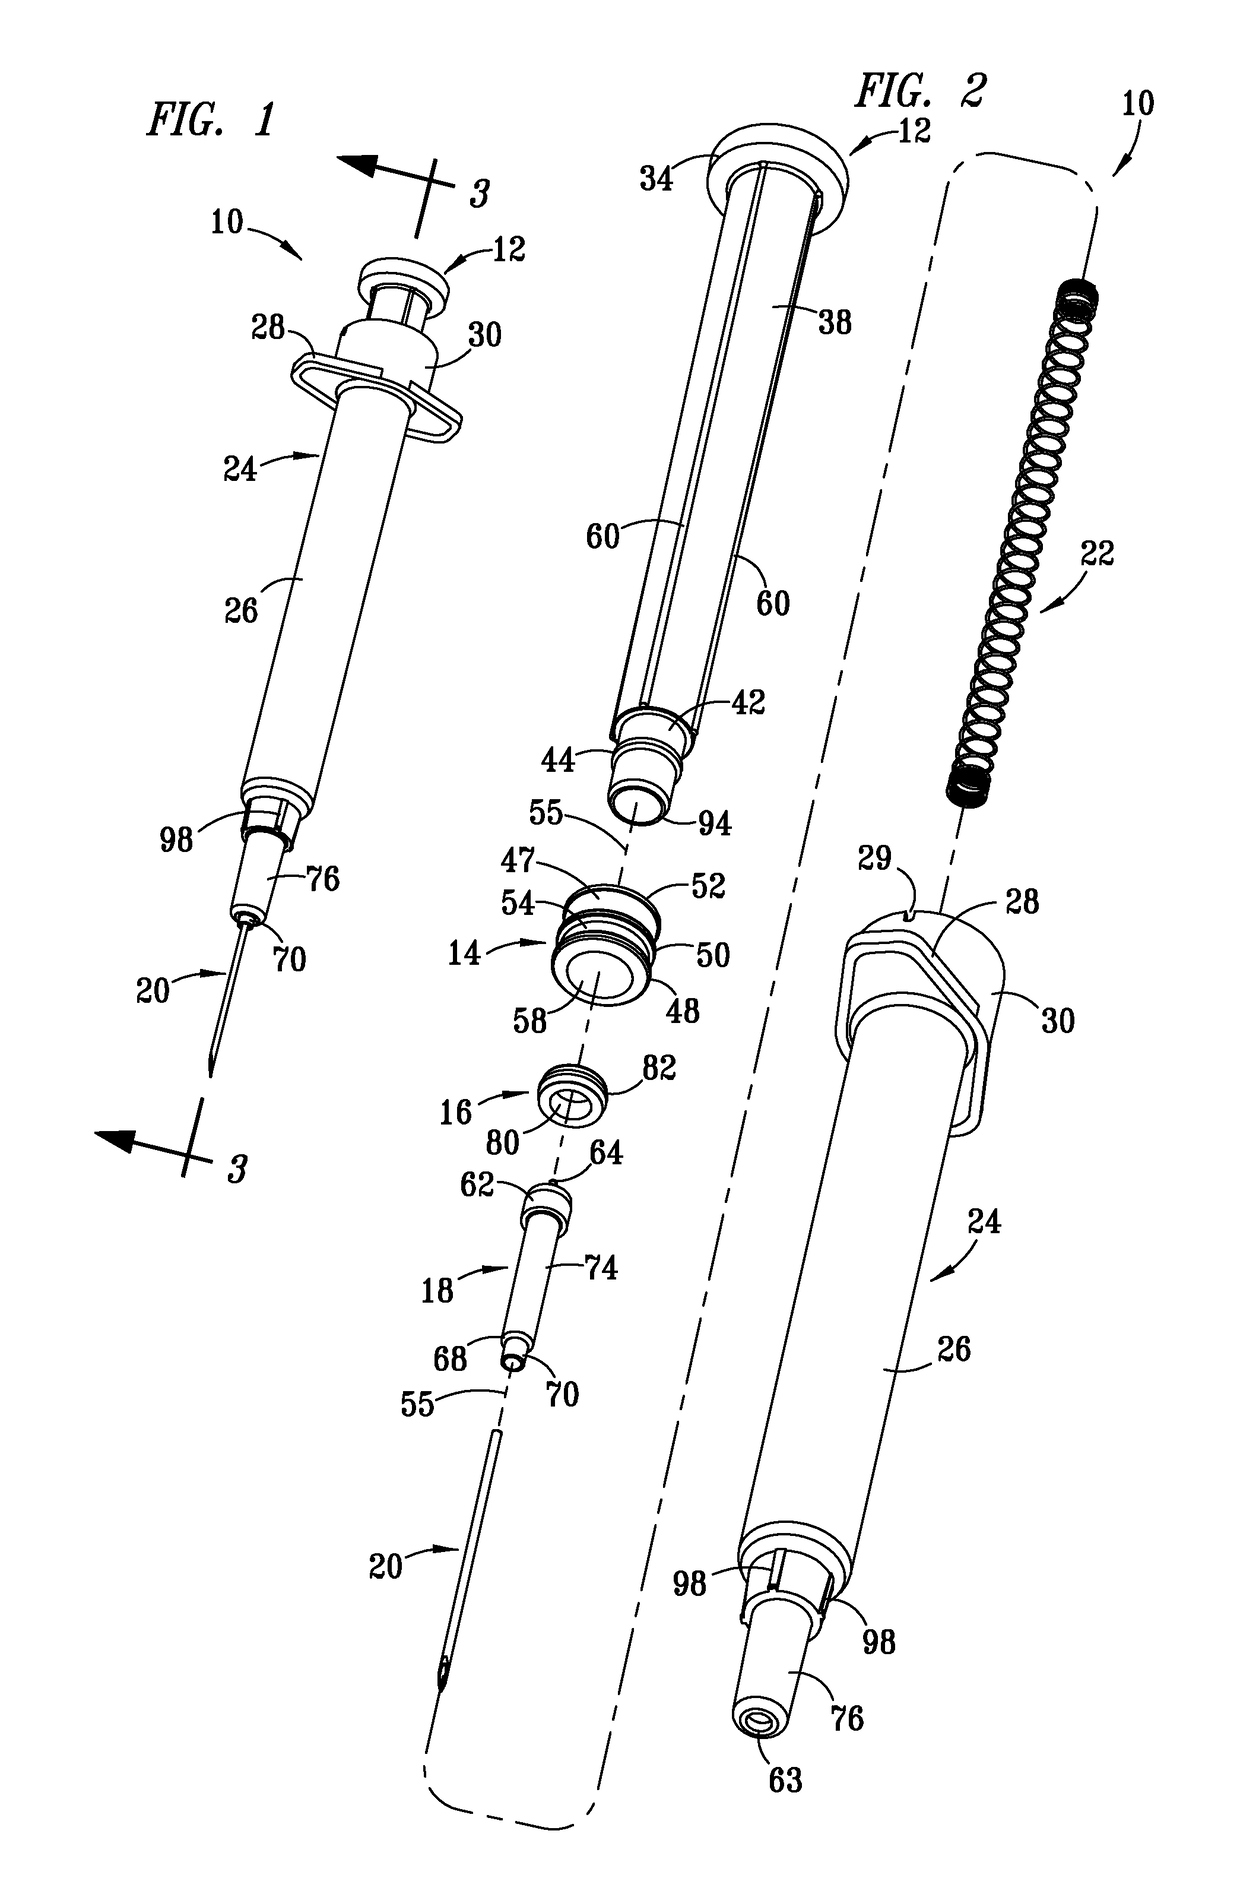 Syringe with retractable needle and moveable plunger seal